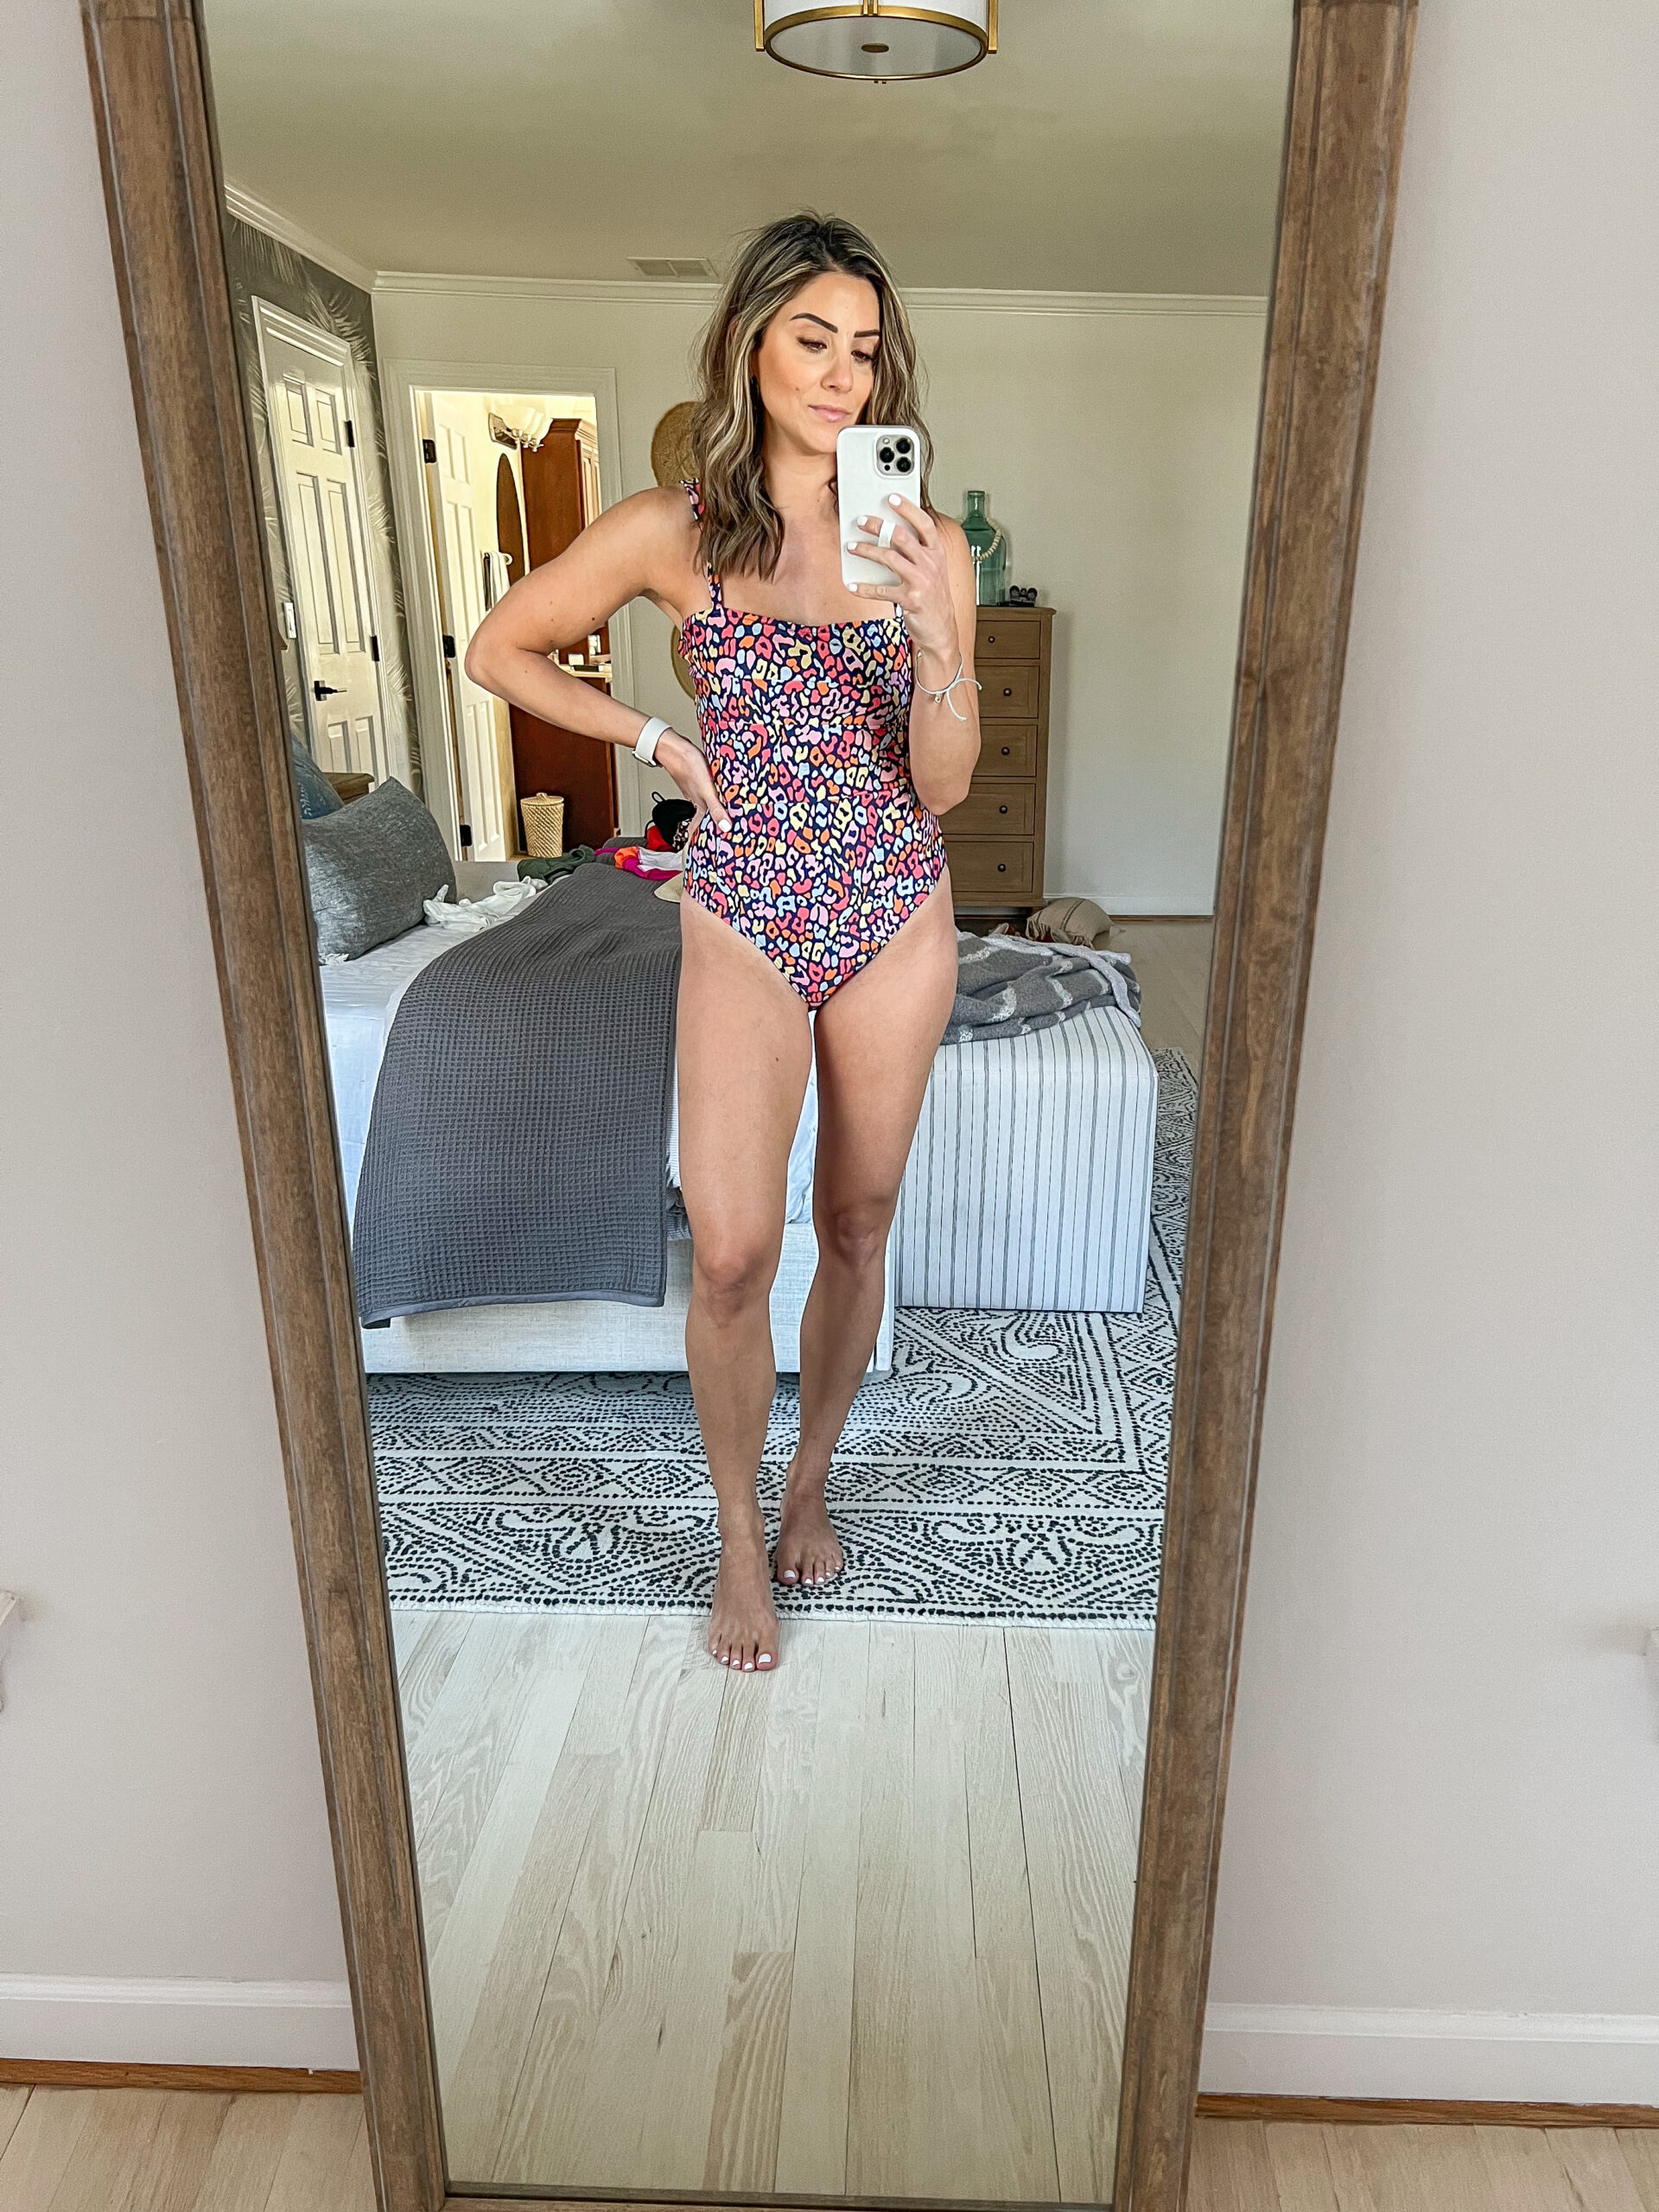 Connecticut life and style blogger Lauren McBride shares stylish one-piece swimsuits with moderate to full coverage.